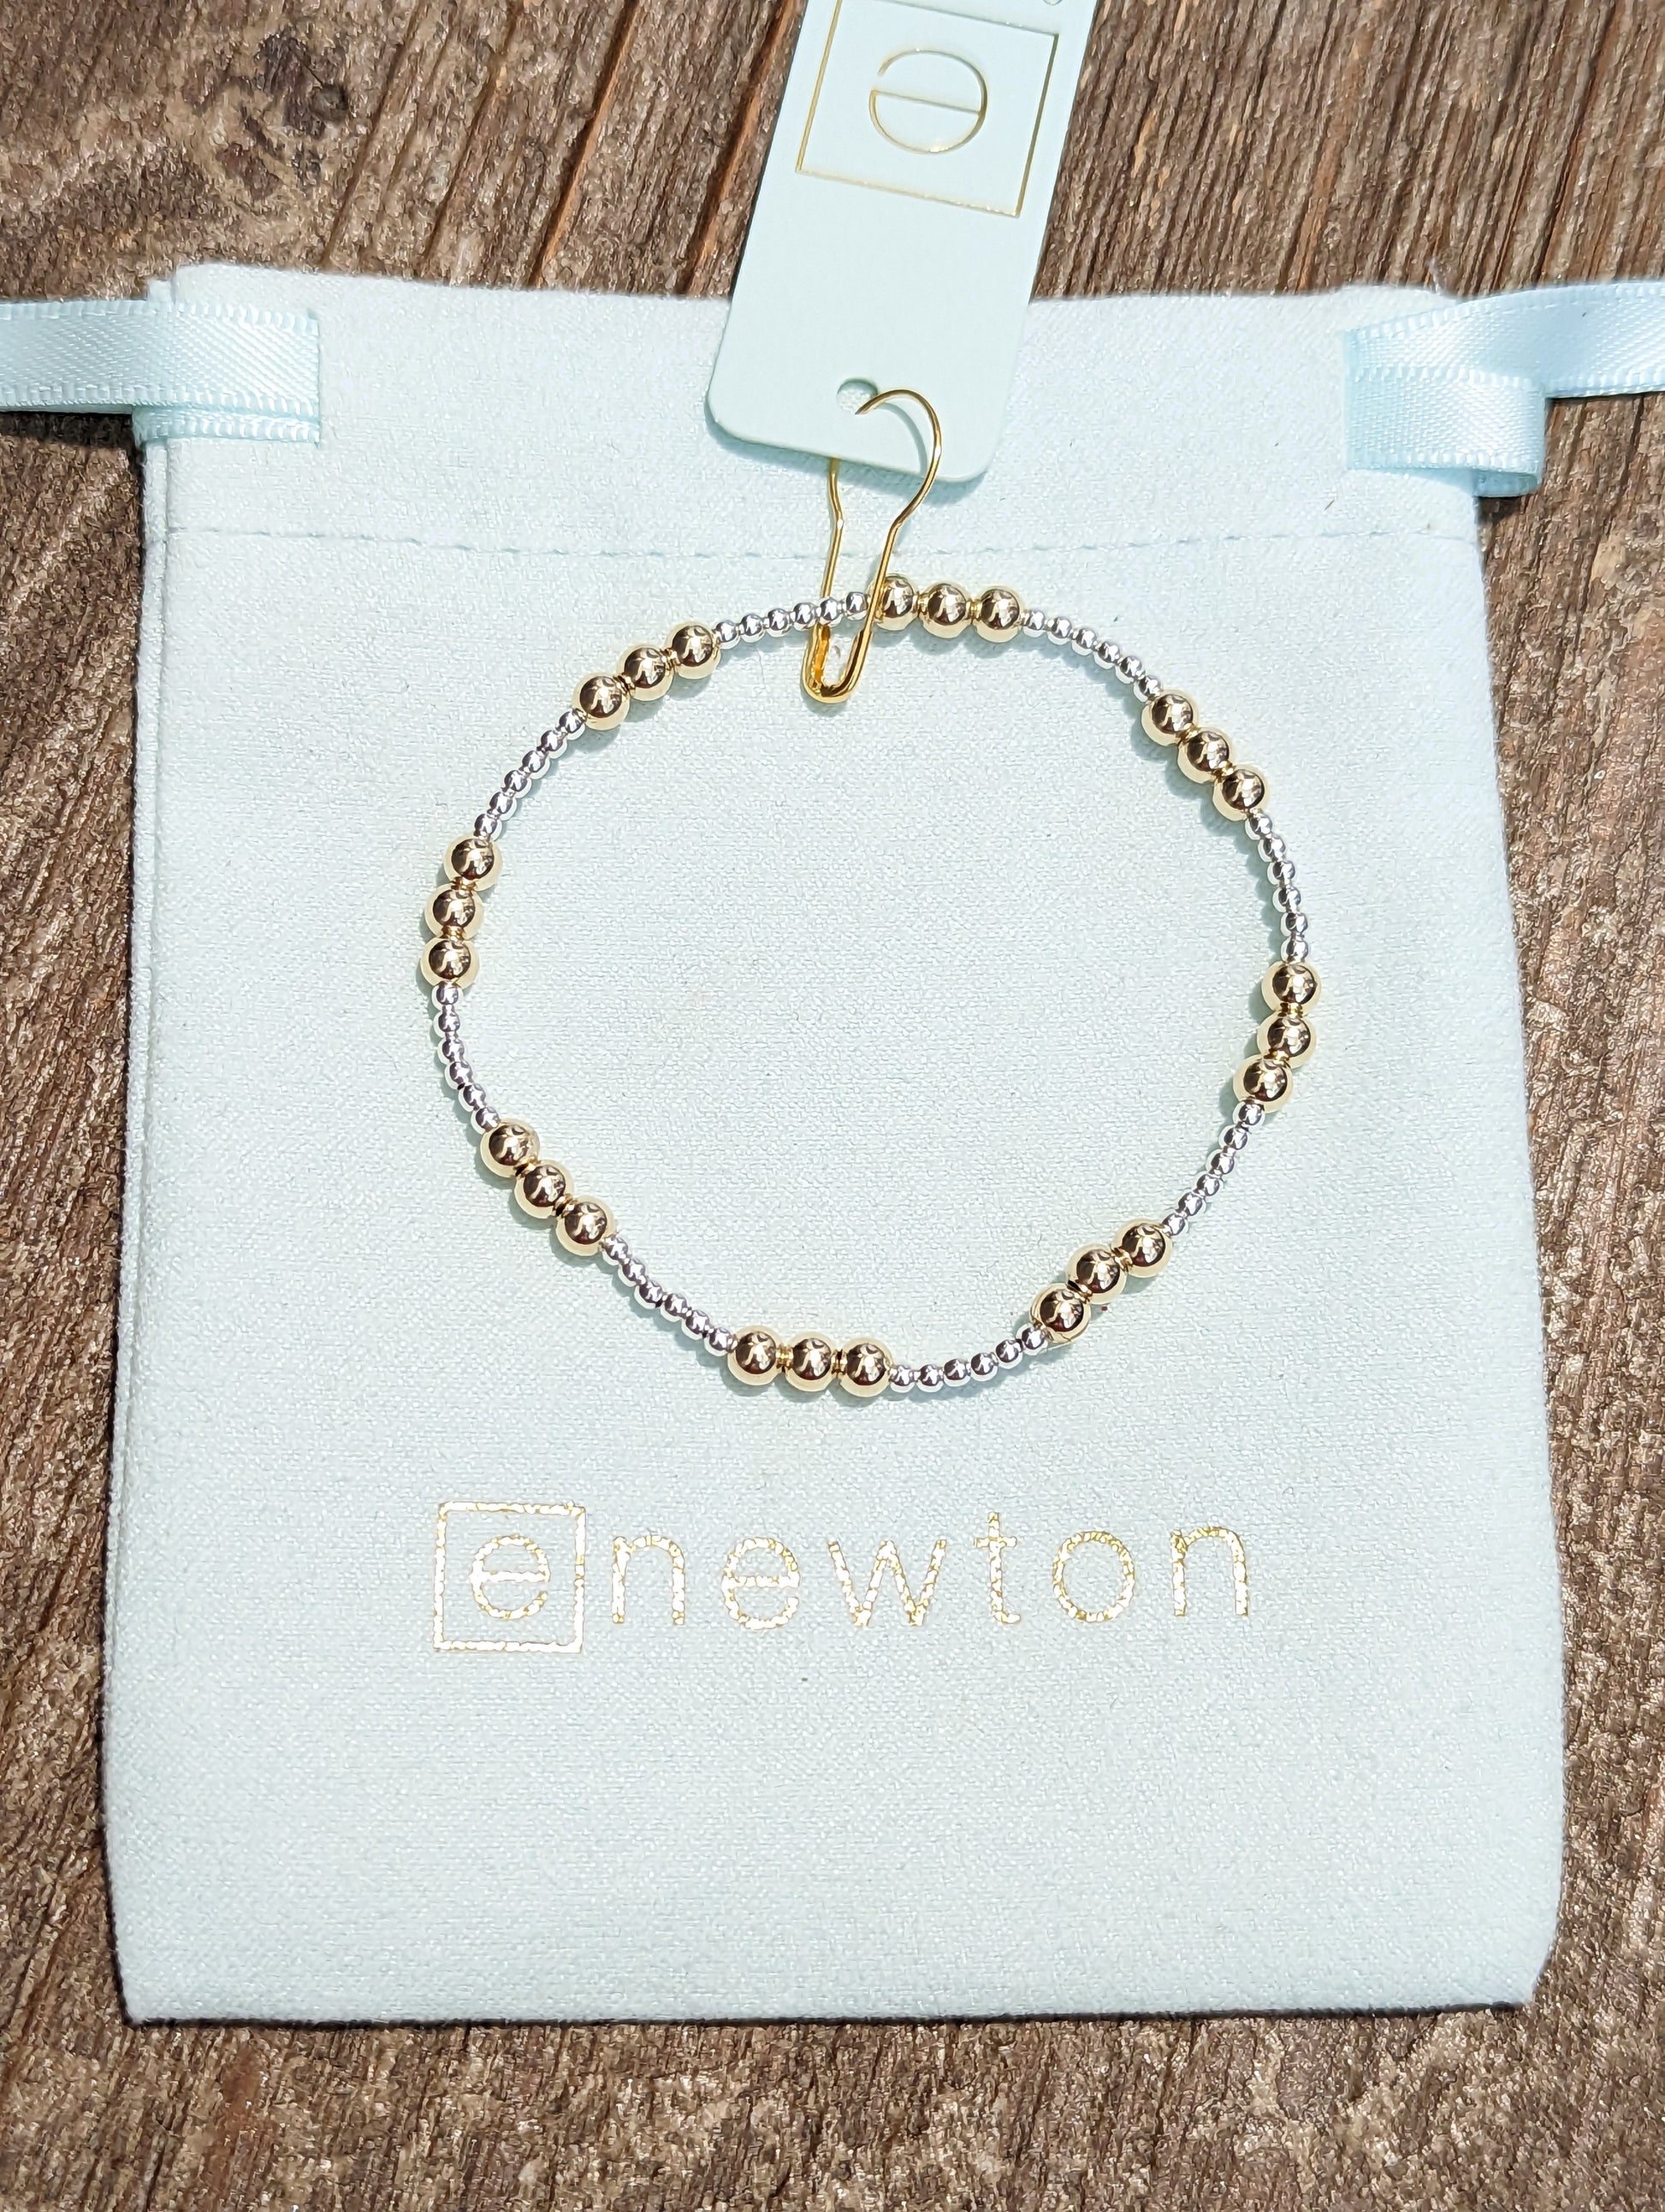 Classic Joy 4mm silver/gold bracelet by eNewton. Shop at The Painted Cottage in Edgewater, MD.